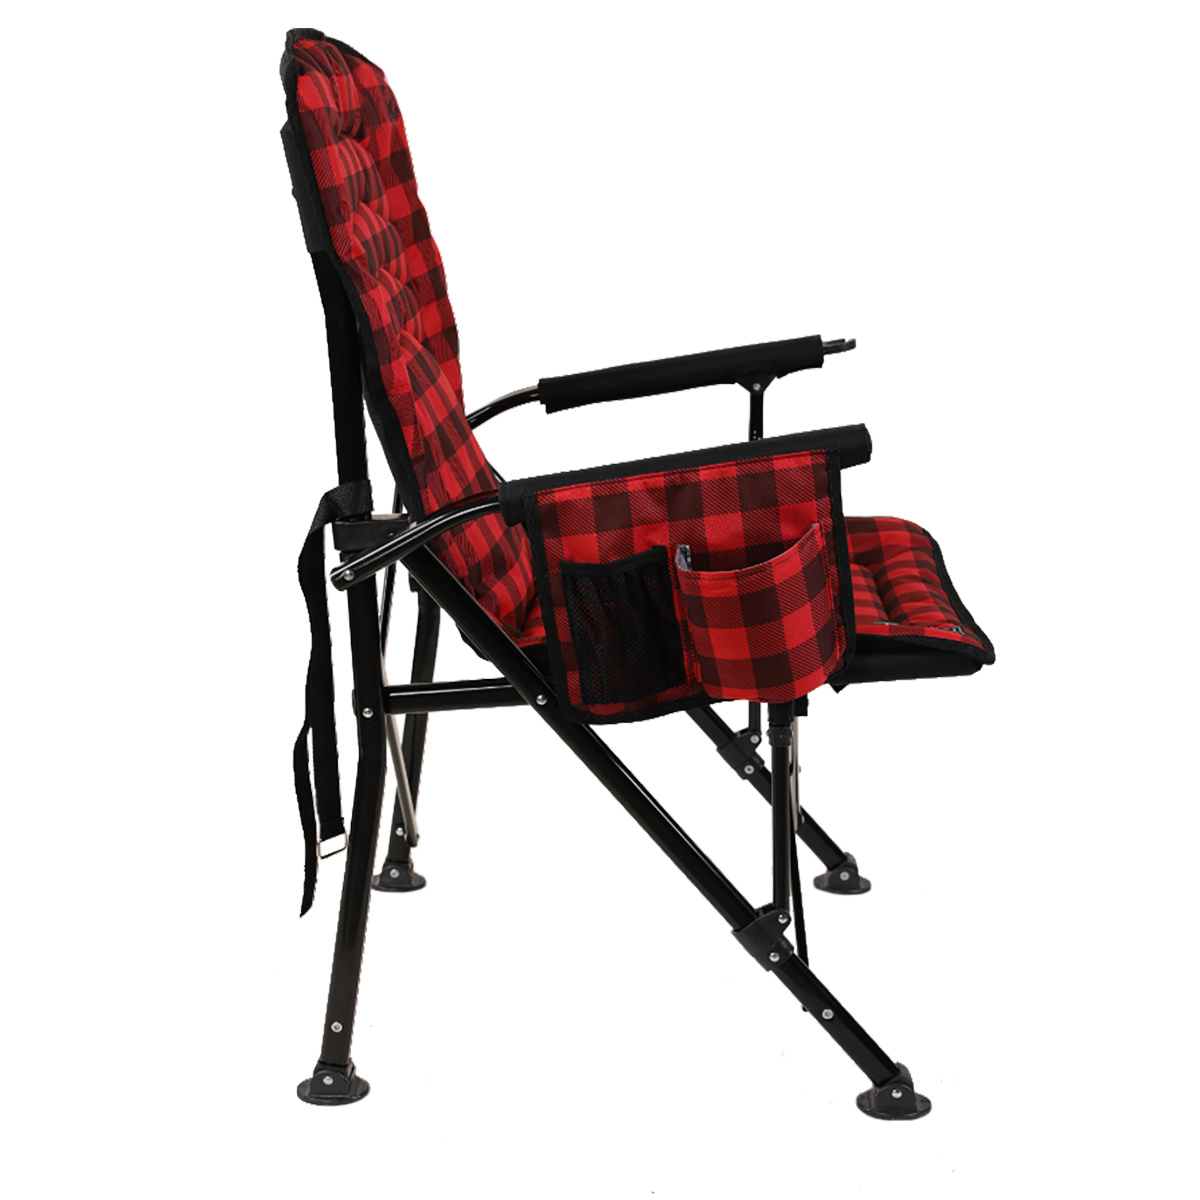 switchback-heated-chair-221026114756-661